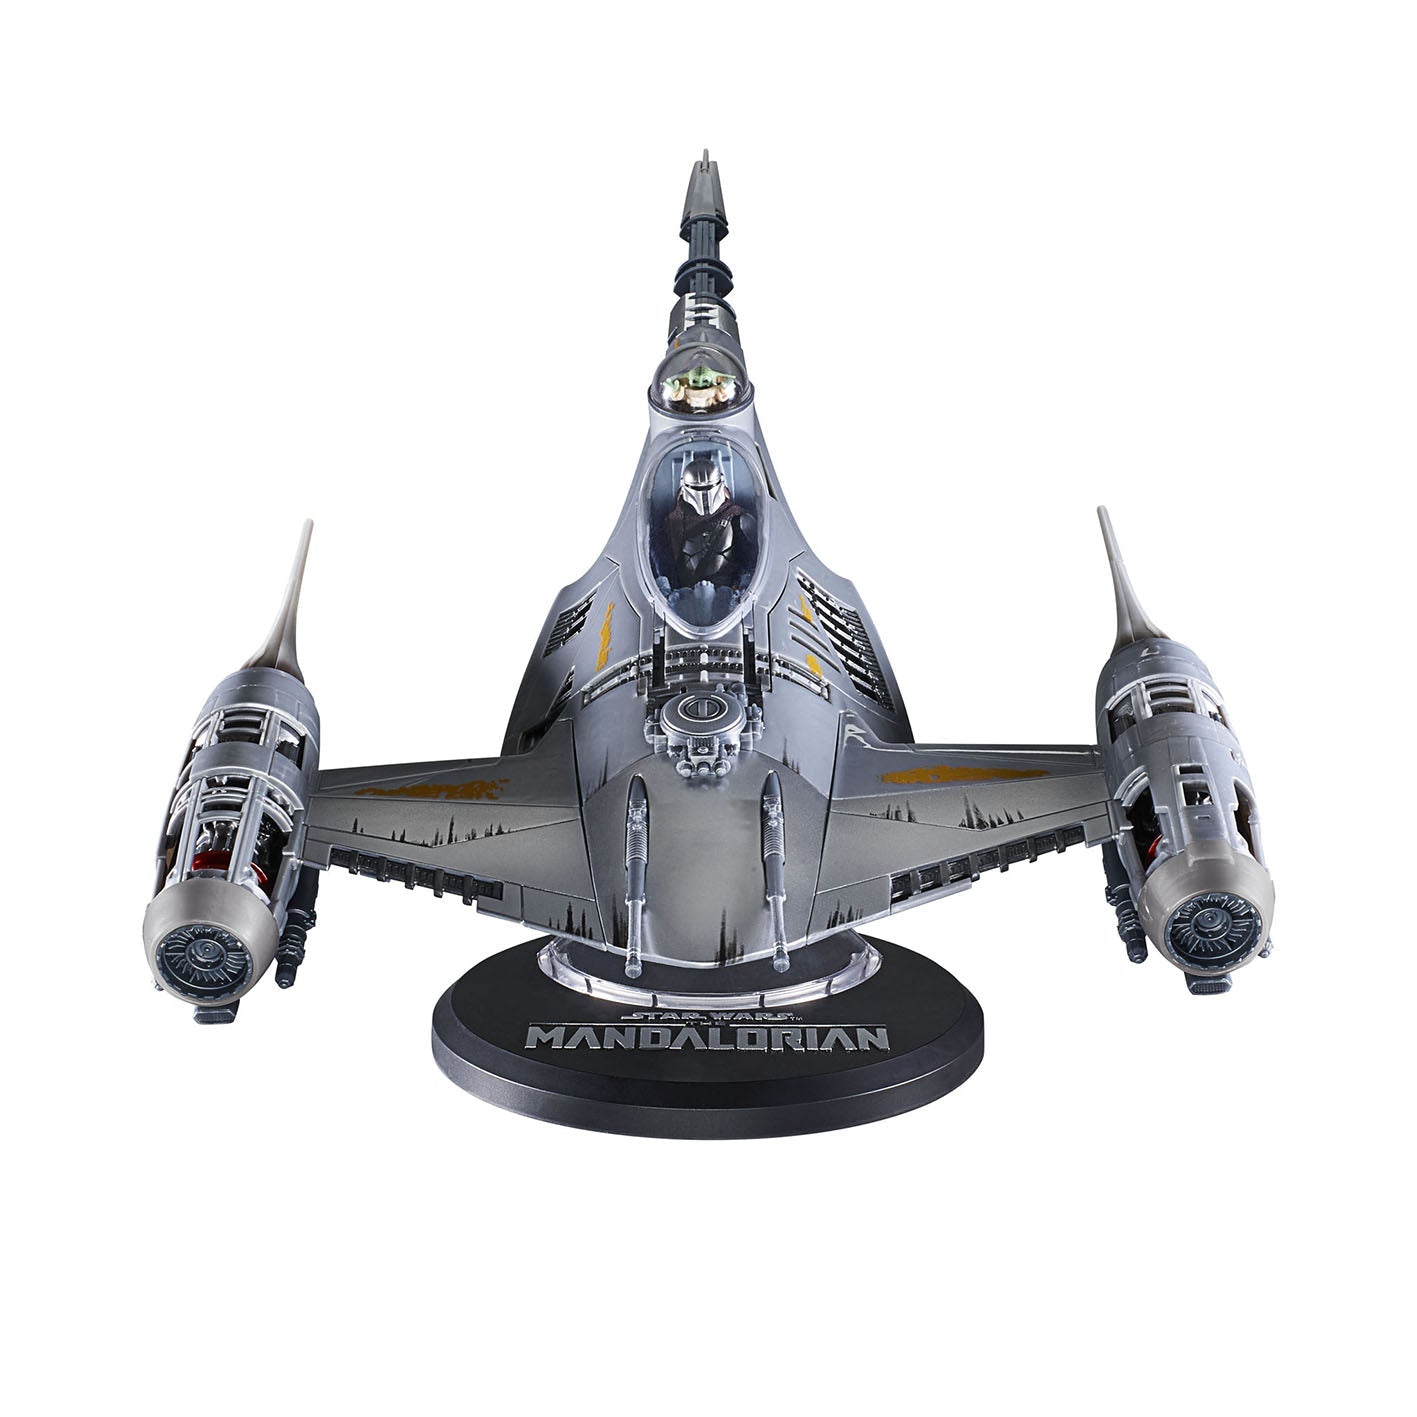 The Mandalorian's N-1 Starfighter, Star Wars: The Vintage Collection